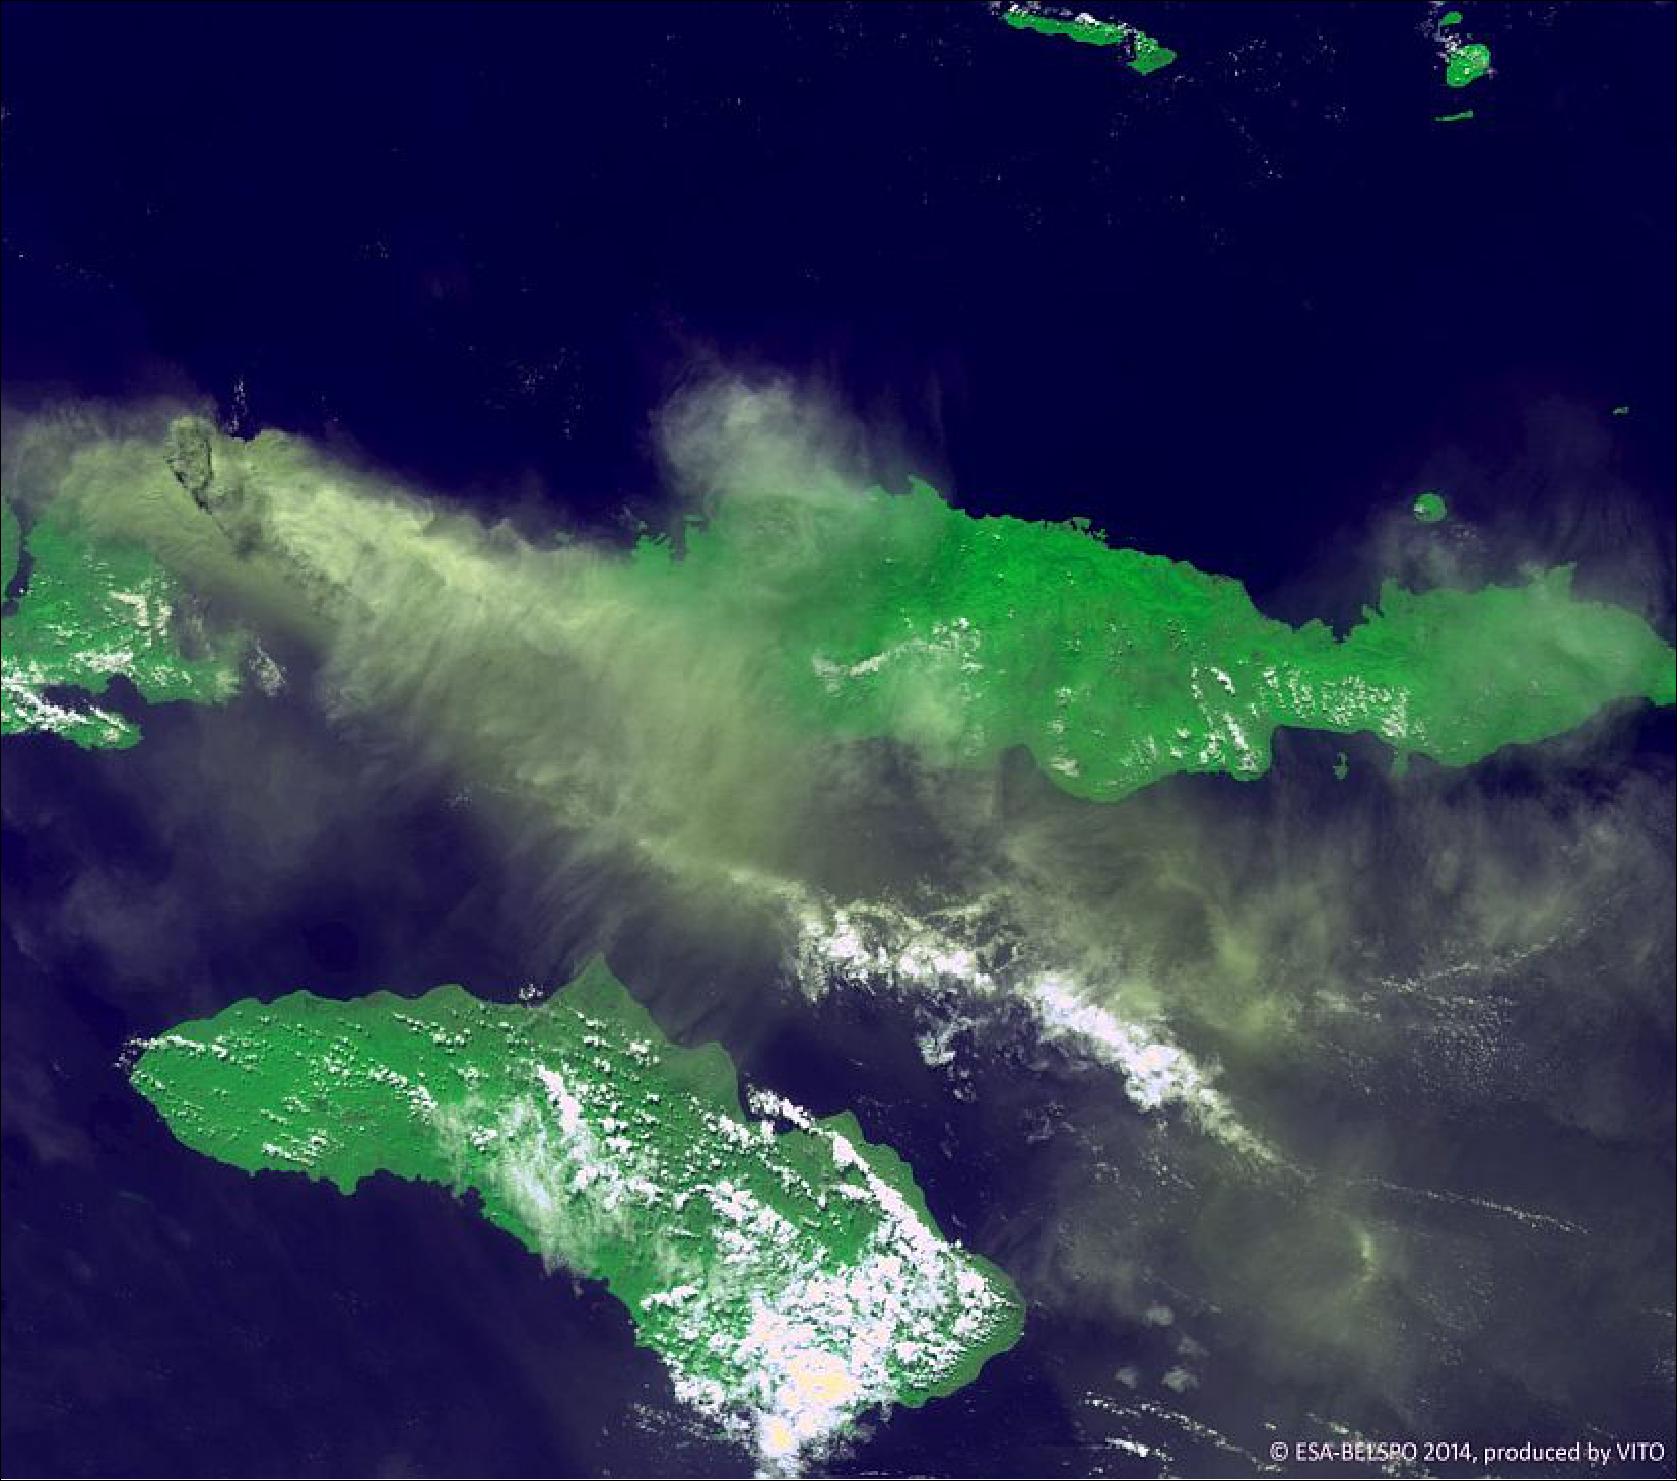 Figure 54: PROBA-V images an Indonesian volcano, acquired on May 31, 2014 at a resolution of 300 m (image credit: ESA, VITO)